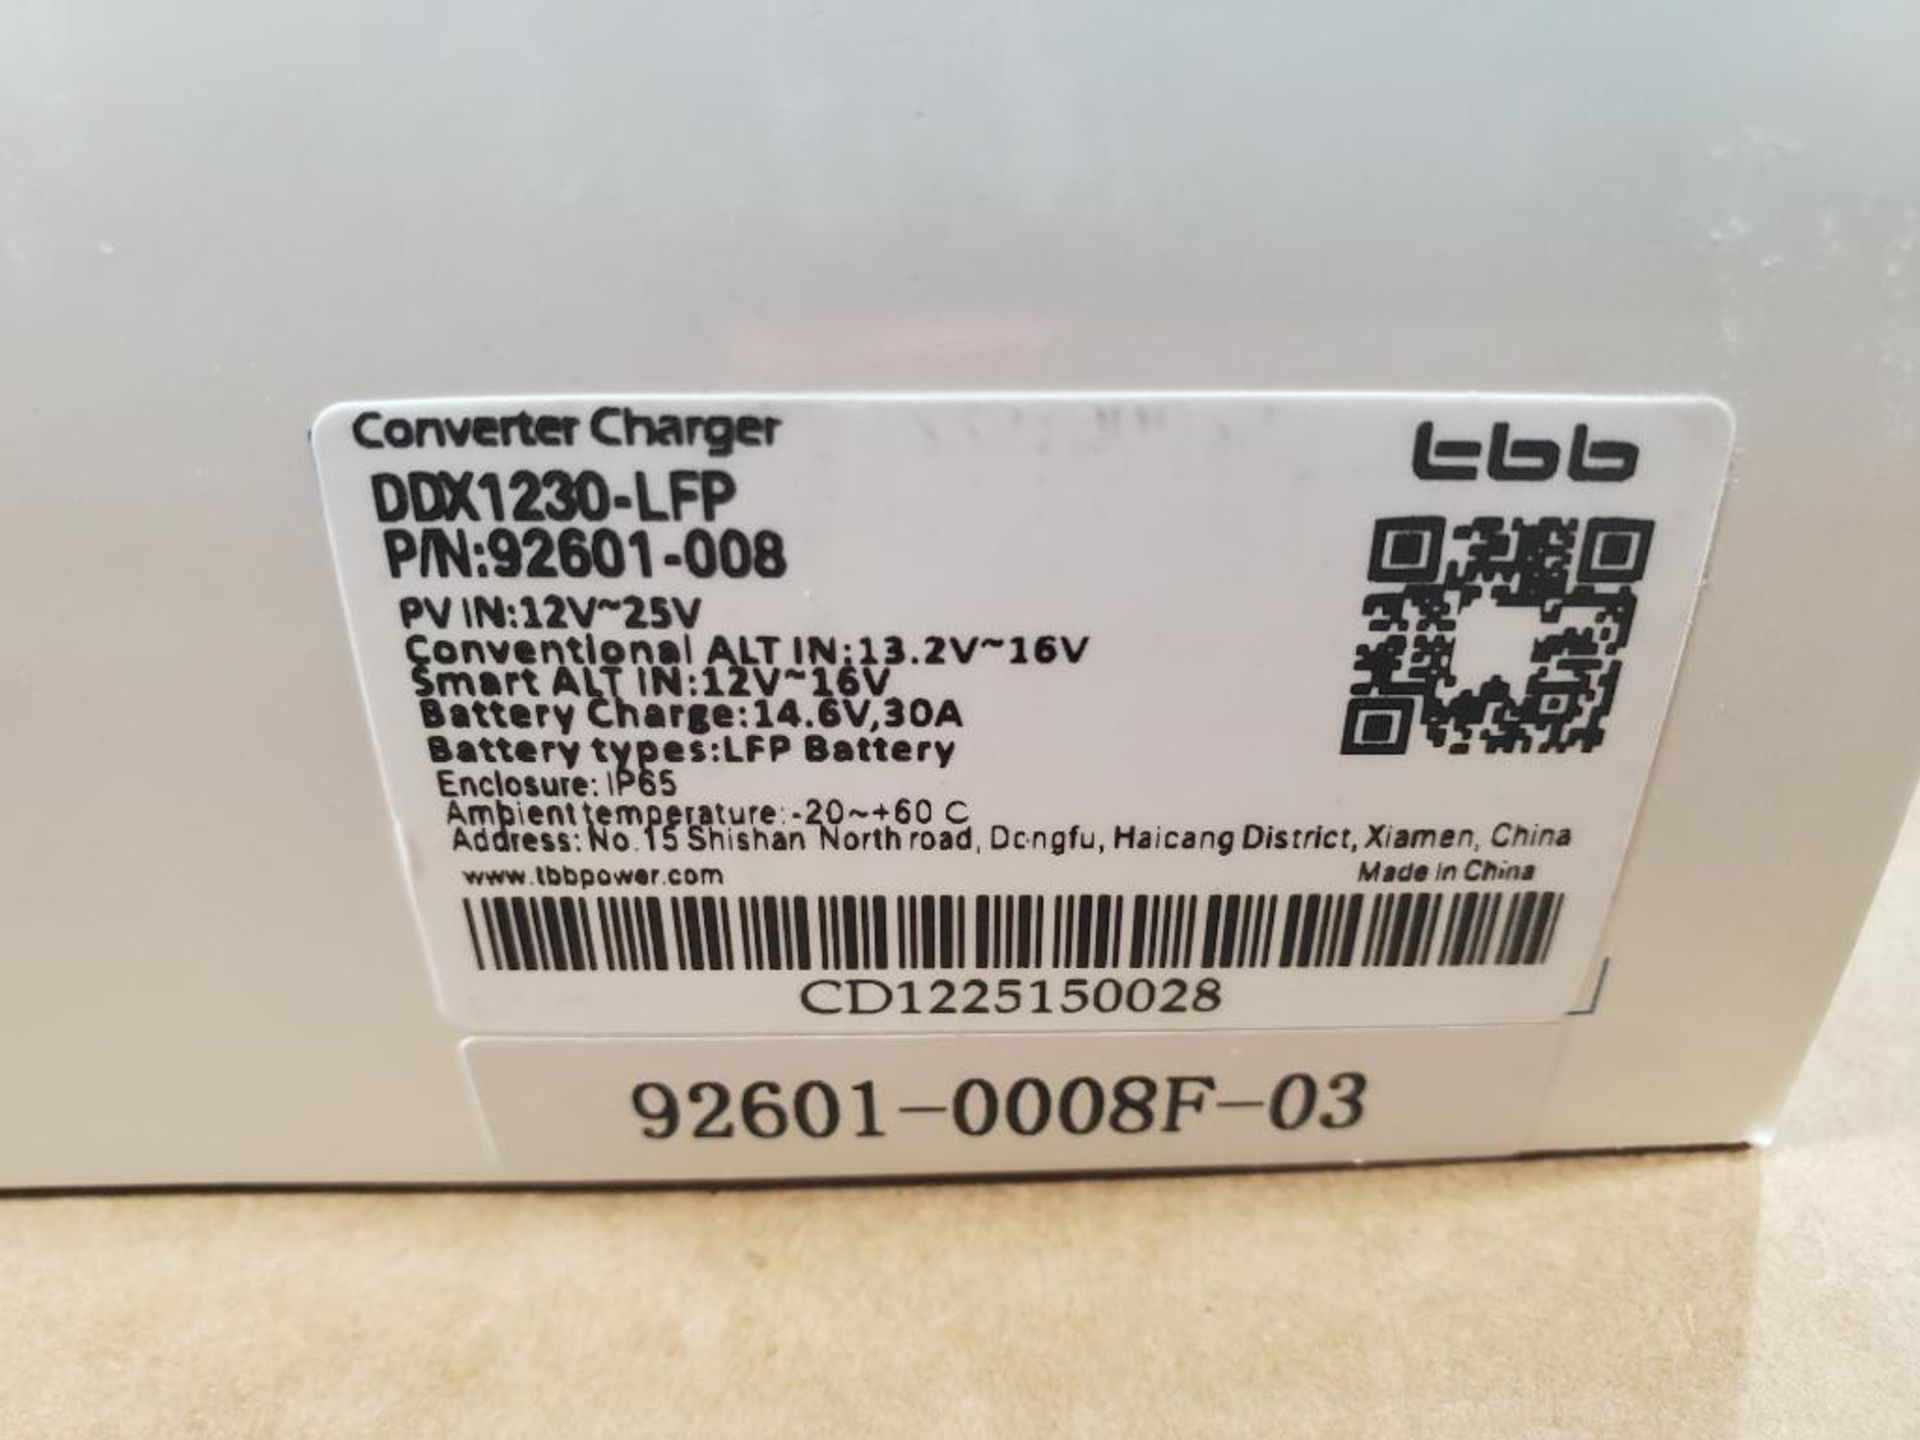 Qty 2 - TBB Power DDX1230-LFP p/n: 9260-008 converter charger. - Image 3 of 3